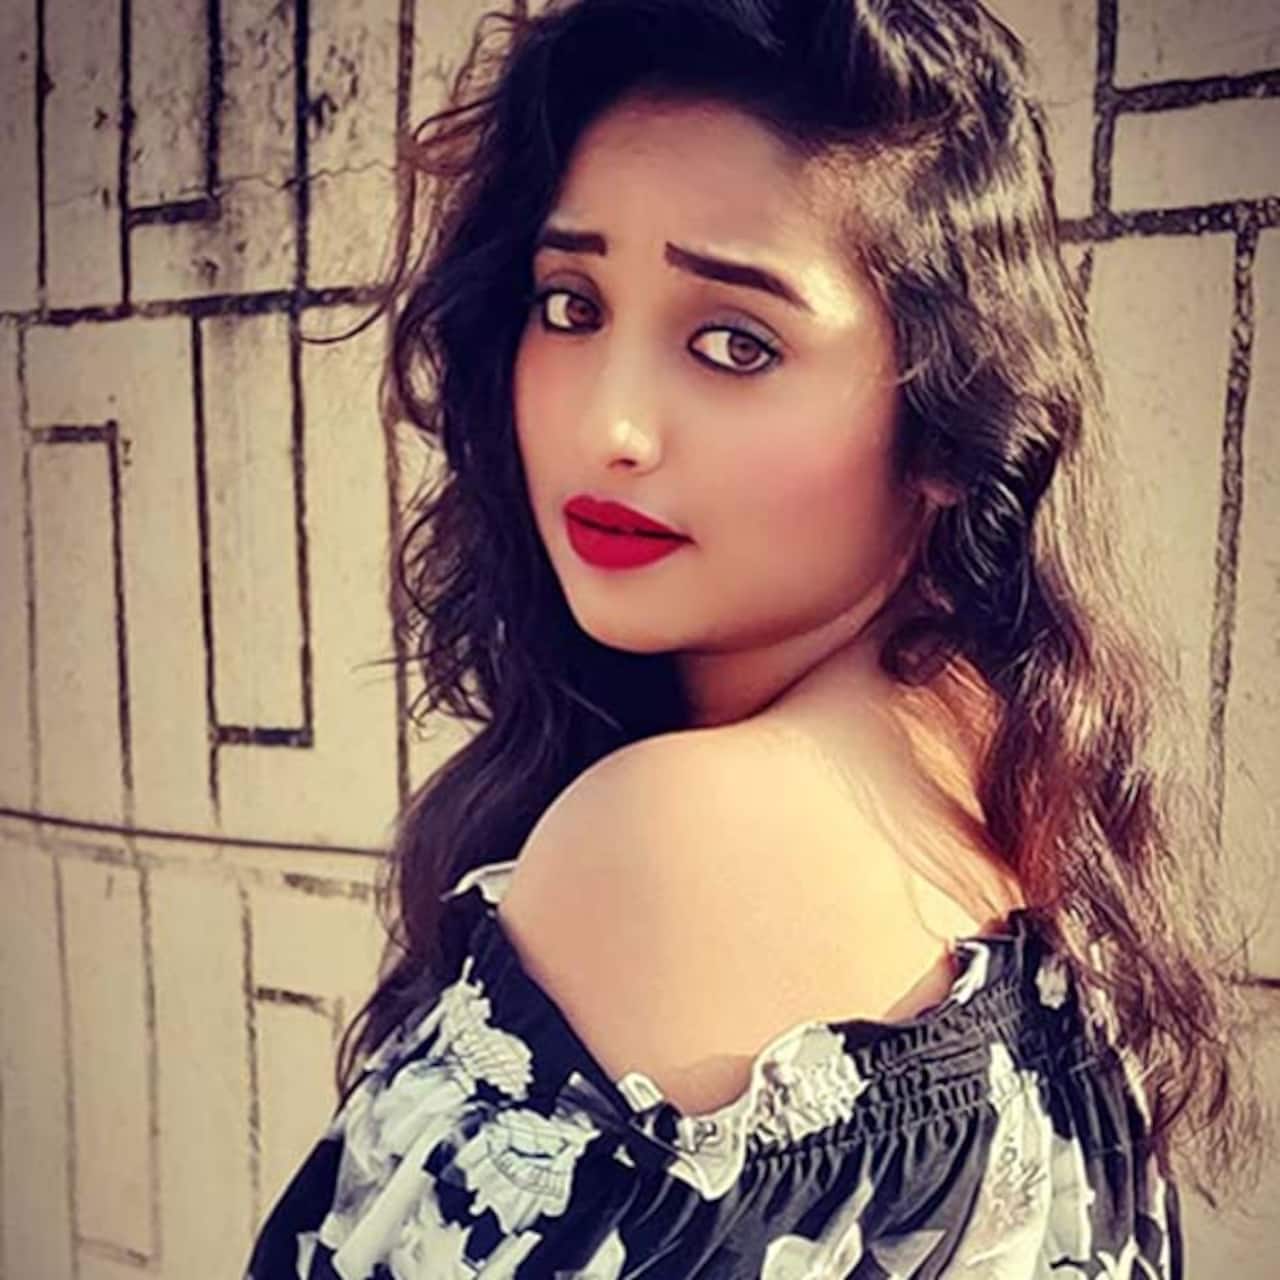 Khatron Ke Khiladi 10 contestant Rani Chatterjee wants to do a music video with THIS Bigg Boss 13 contestant